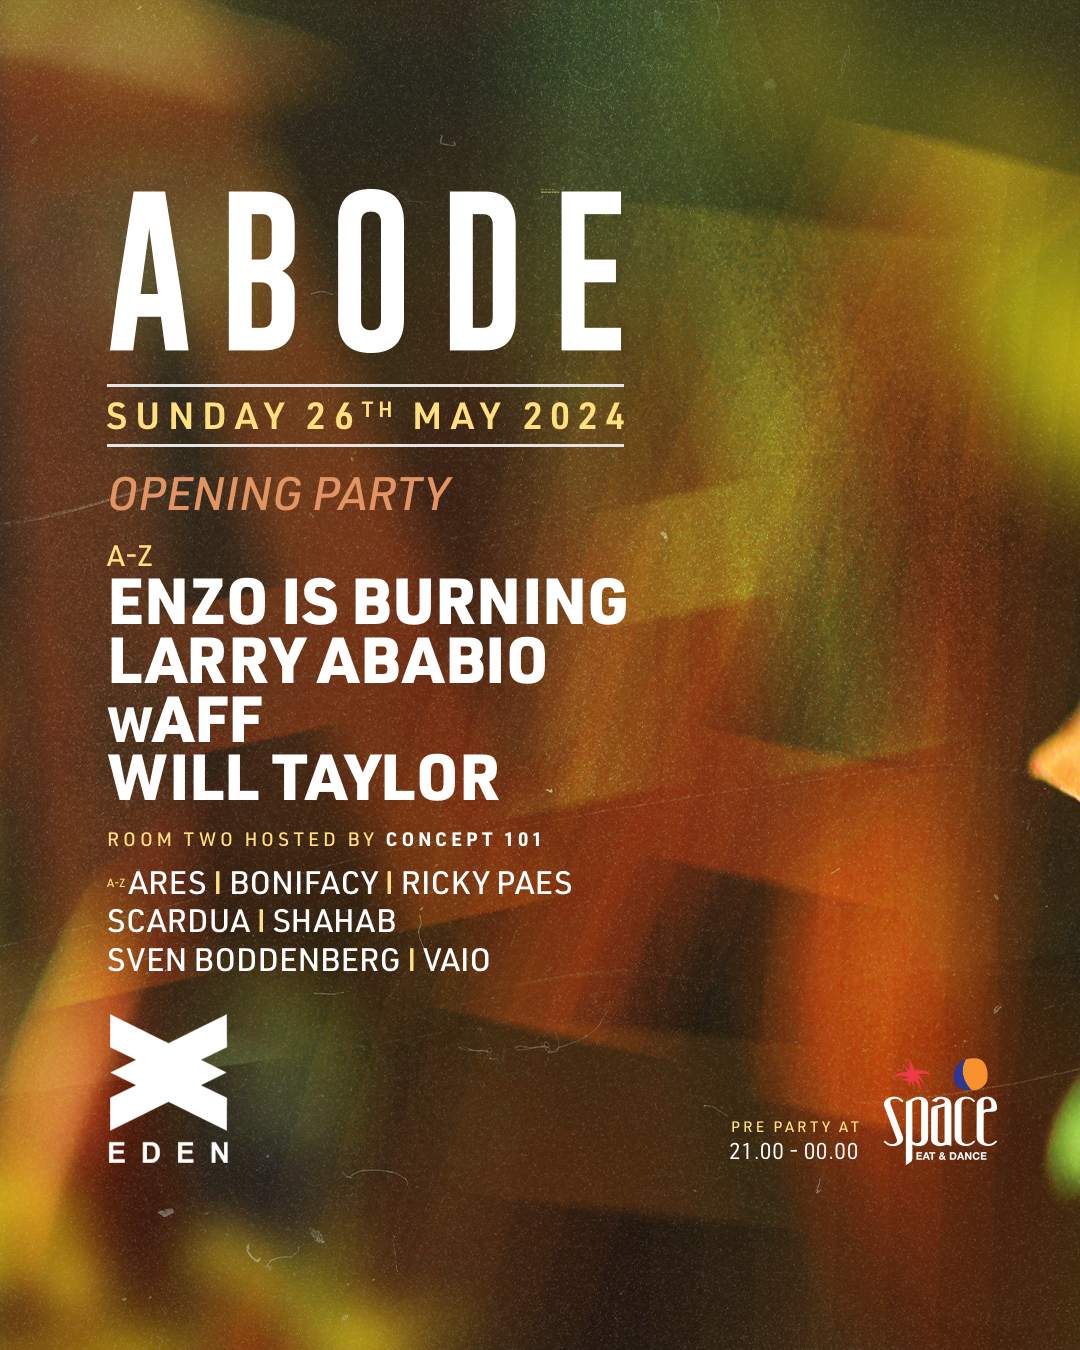 ABODE Sundays - May 26th (Opening party) - Página frontal